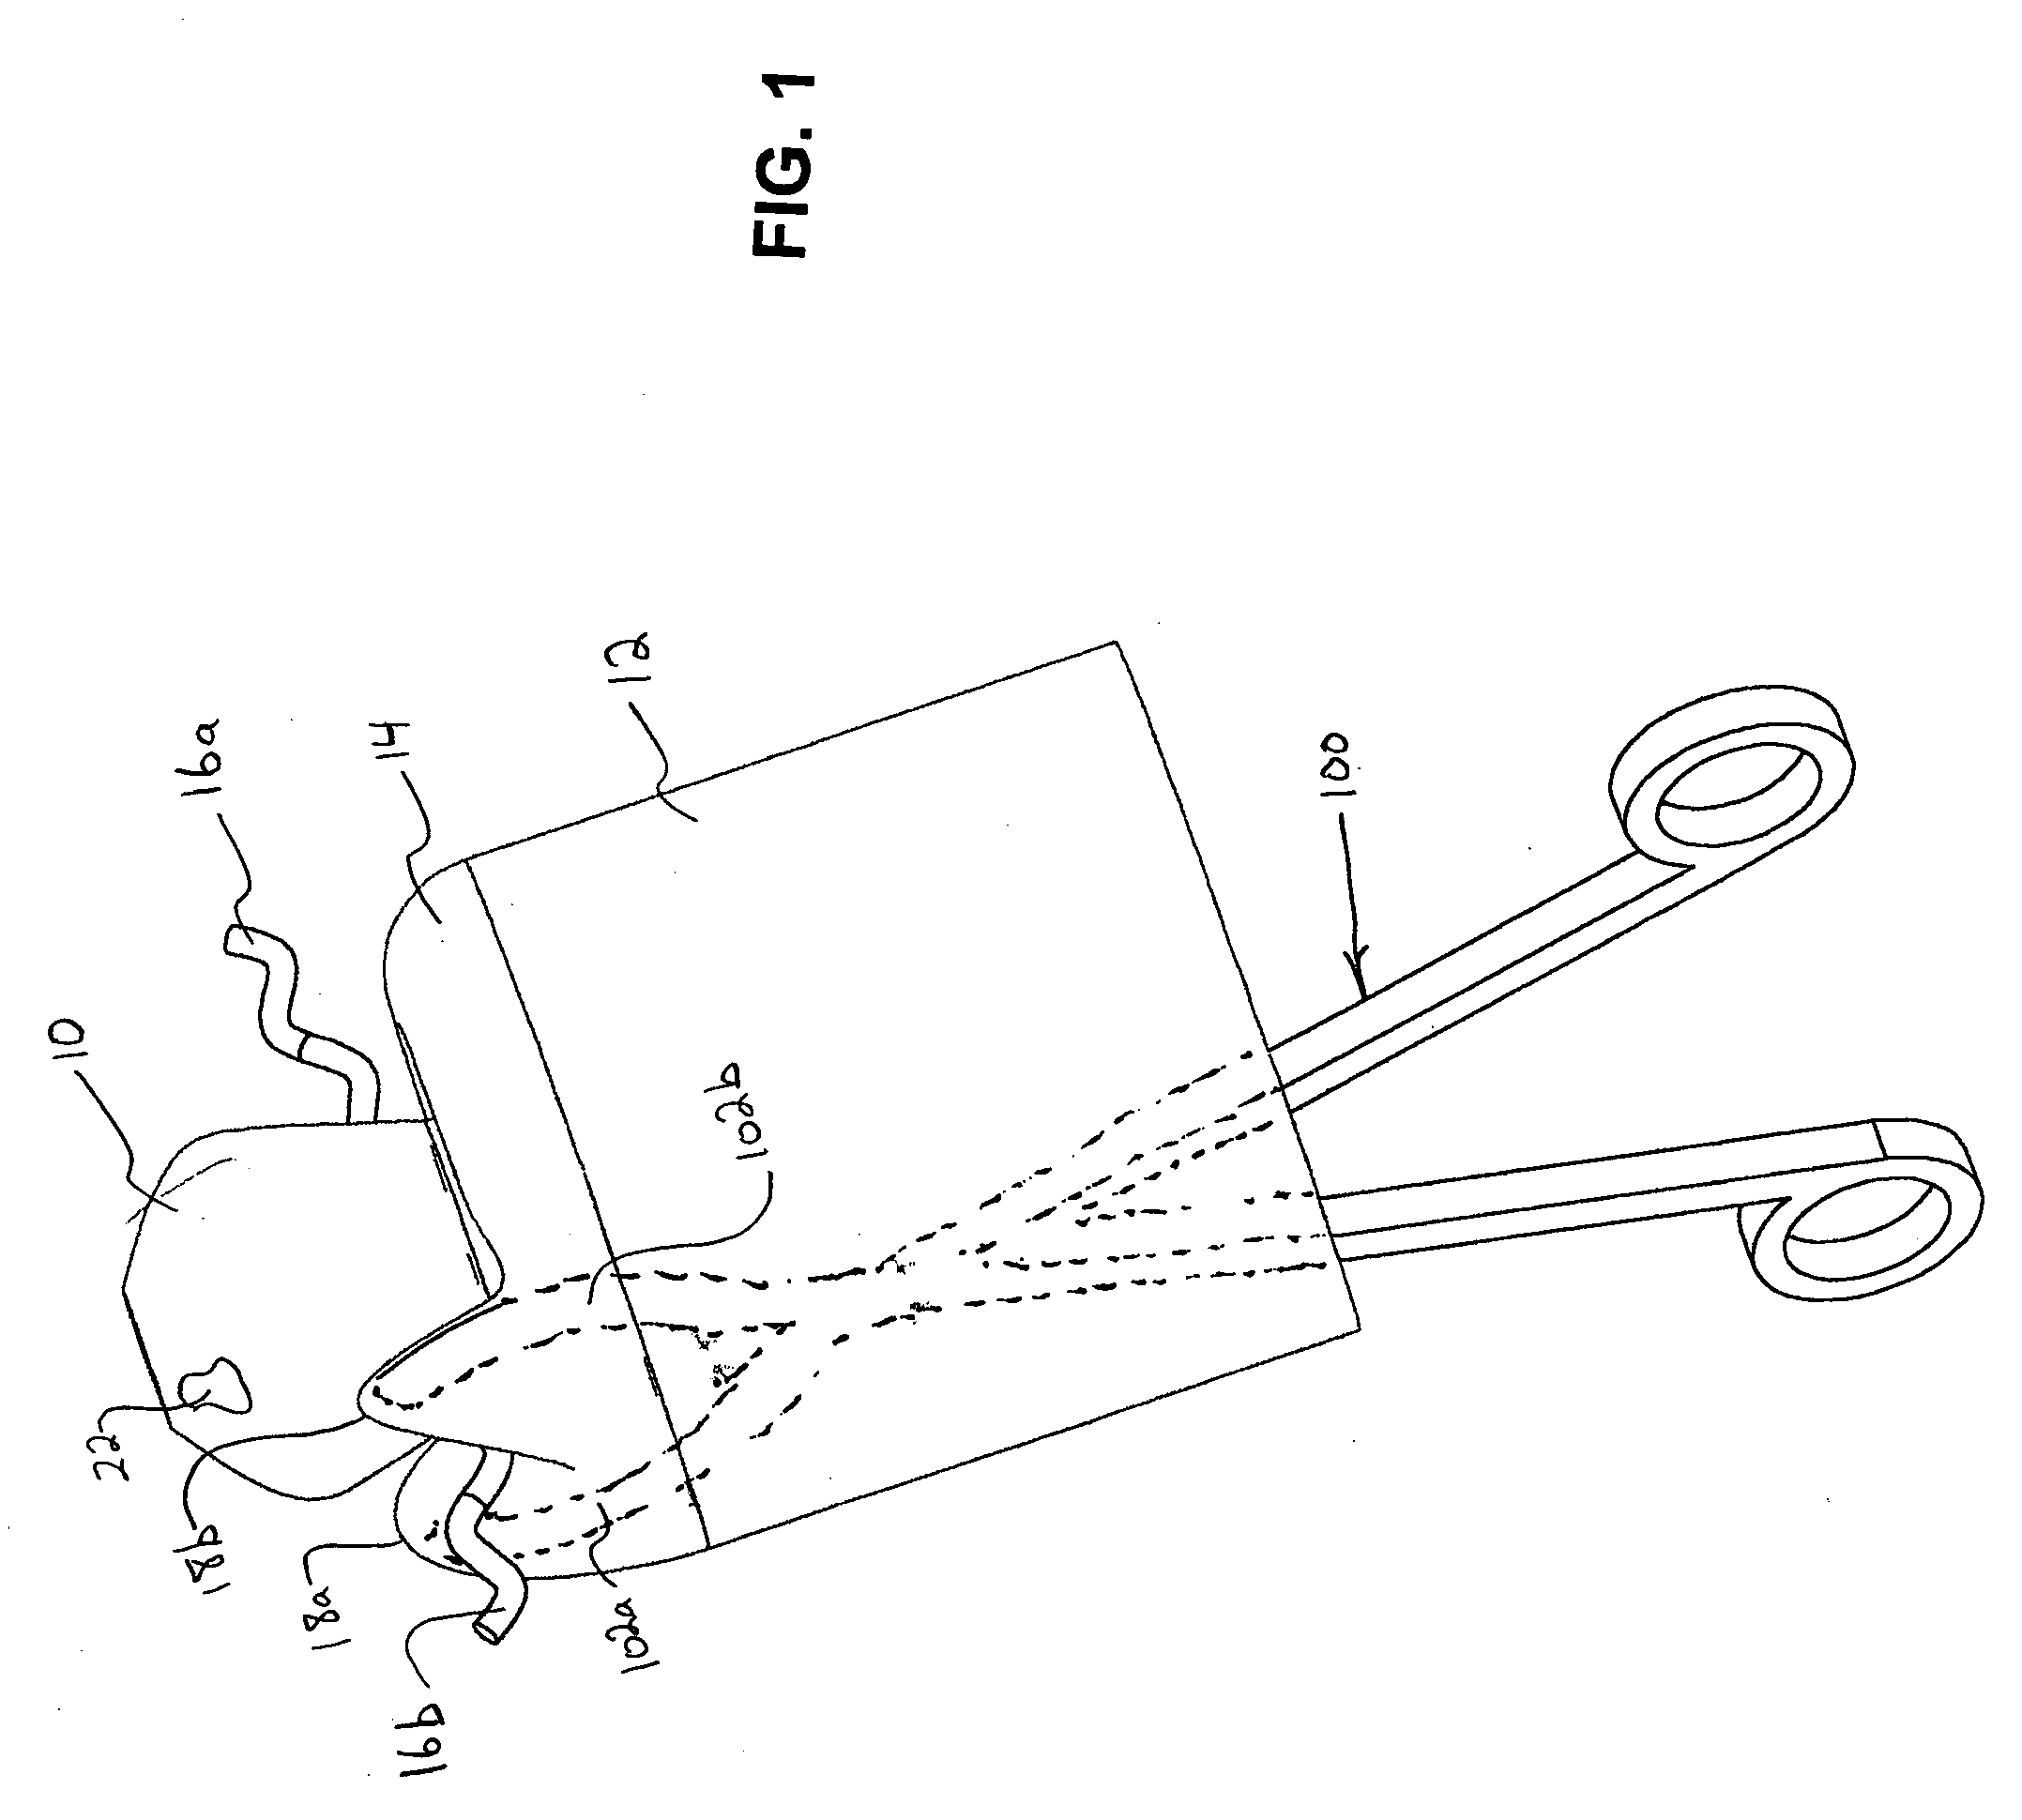 Methods for minimally-invasive, non-permanent occlusion of a uterine artery